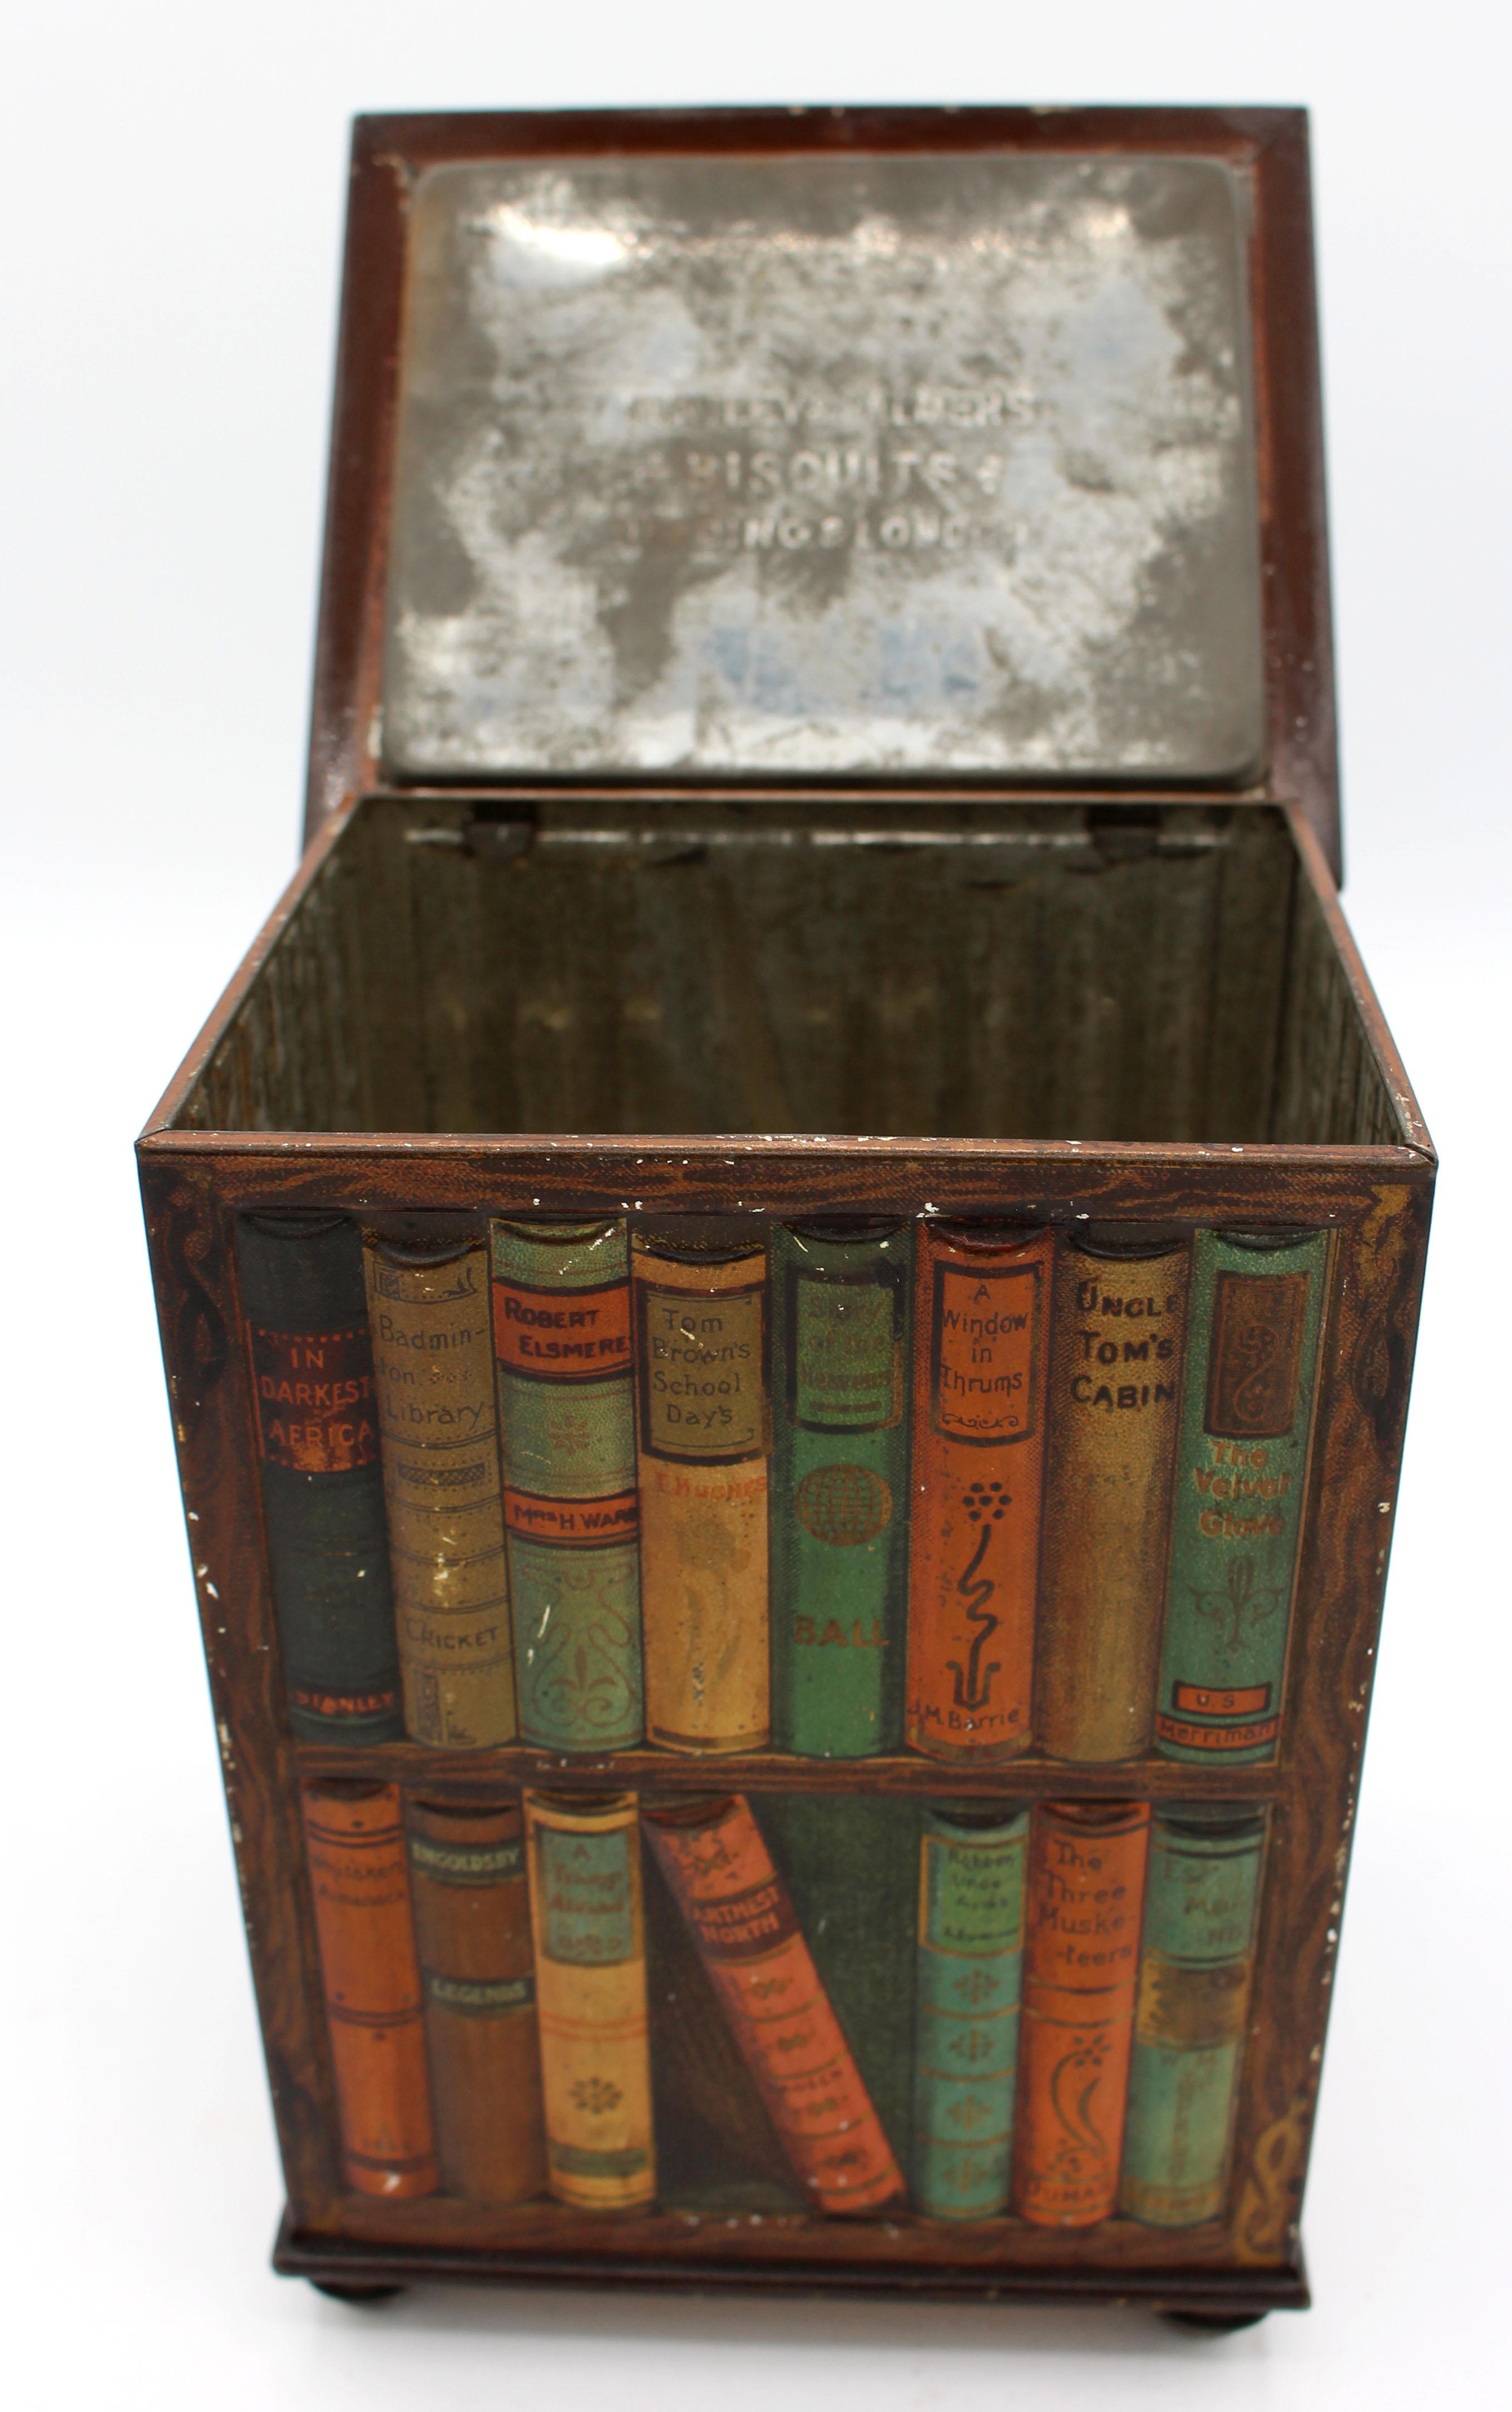 Faux revolving bookcase biscuit tin box by Huntley & Palmers, 1905, English. In the form of a revolving bookcase filled with classic novels, notice the detail - end covers show on sides. Overall good condition given age & use, top darkened & minor